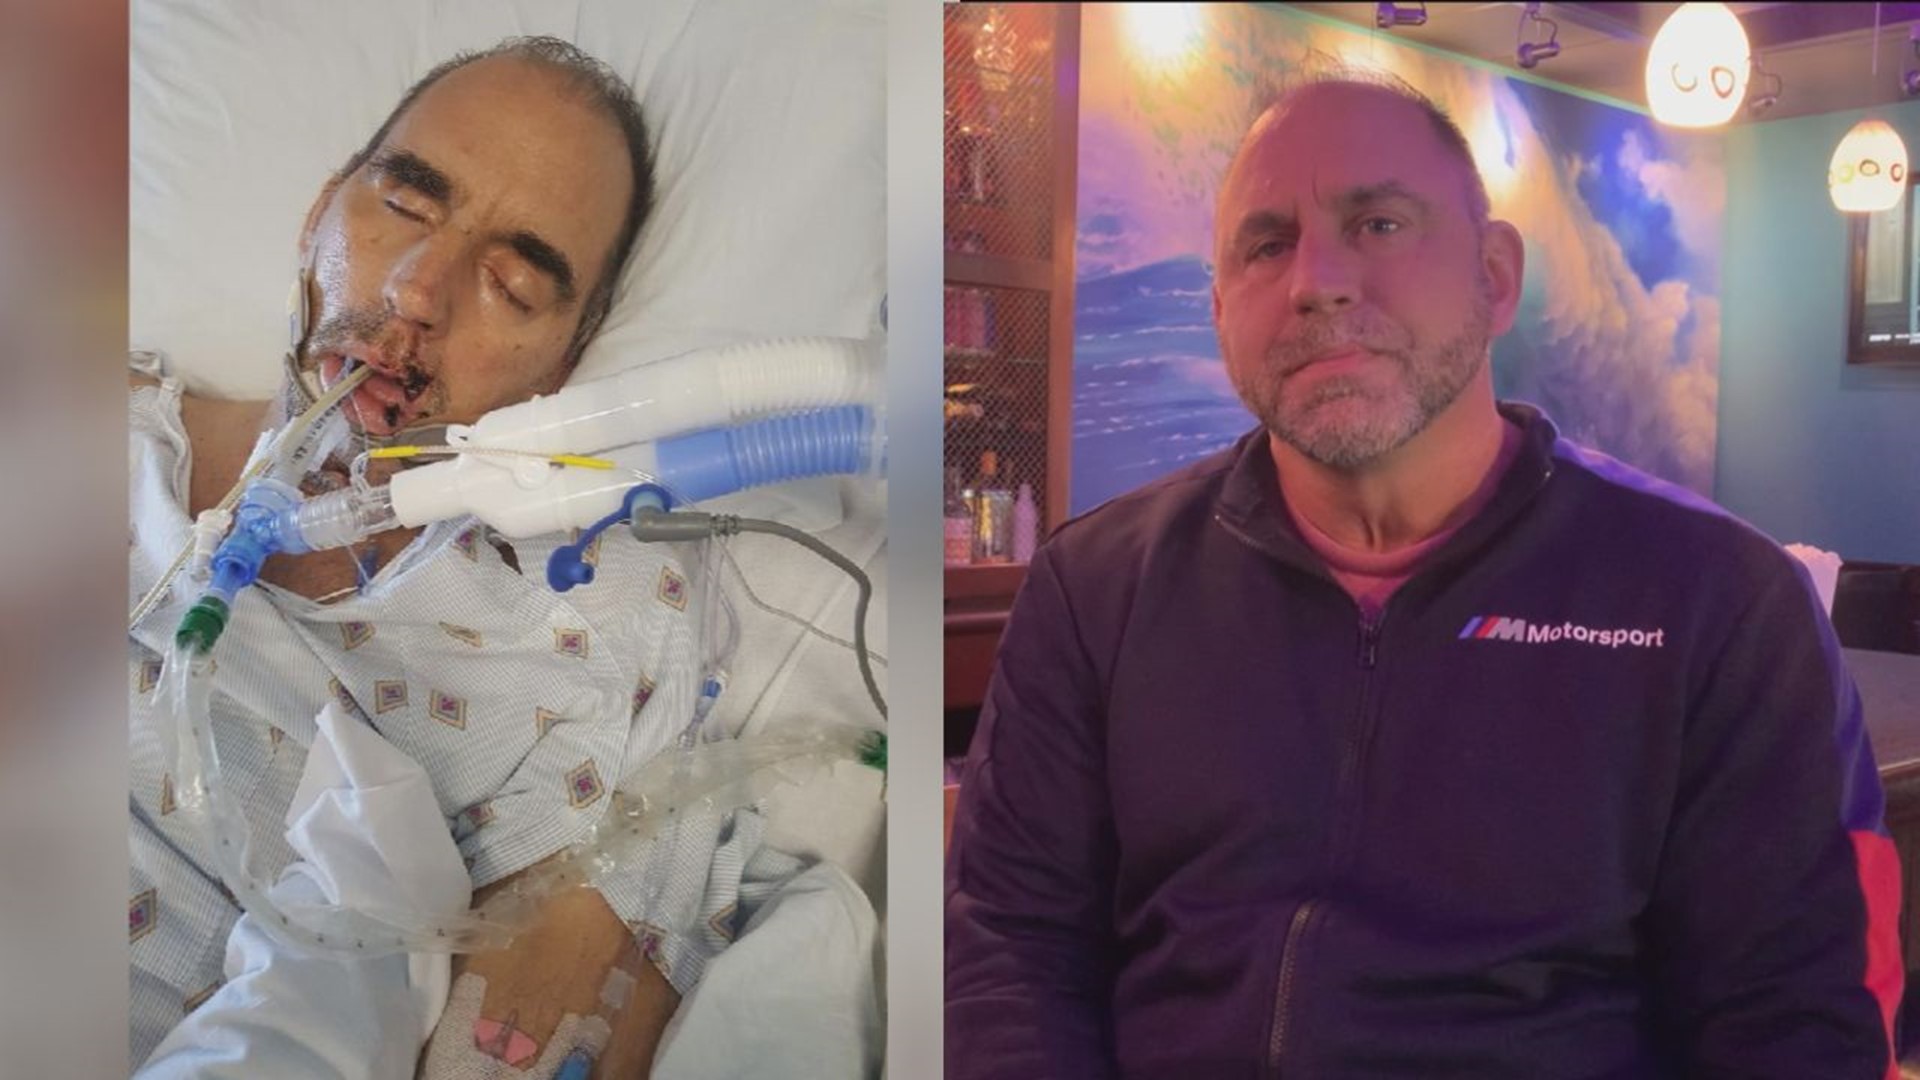 Nick Barakos, owner of Kyma Seafood & Johnny's Bar and Steakhouse, credits the incredible ICU staff at Wellspan for his recovery.